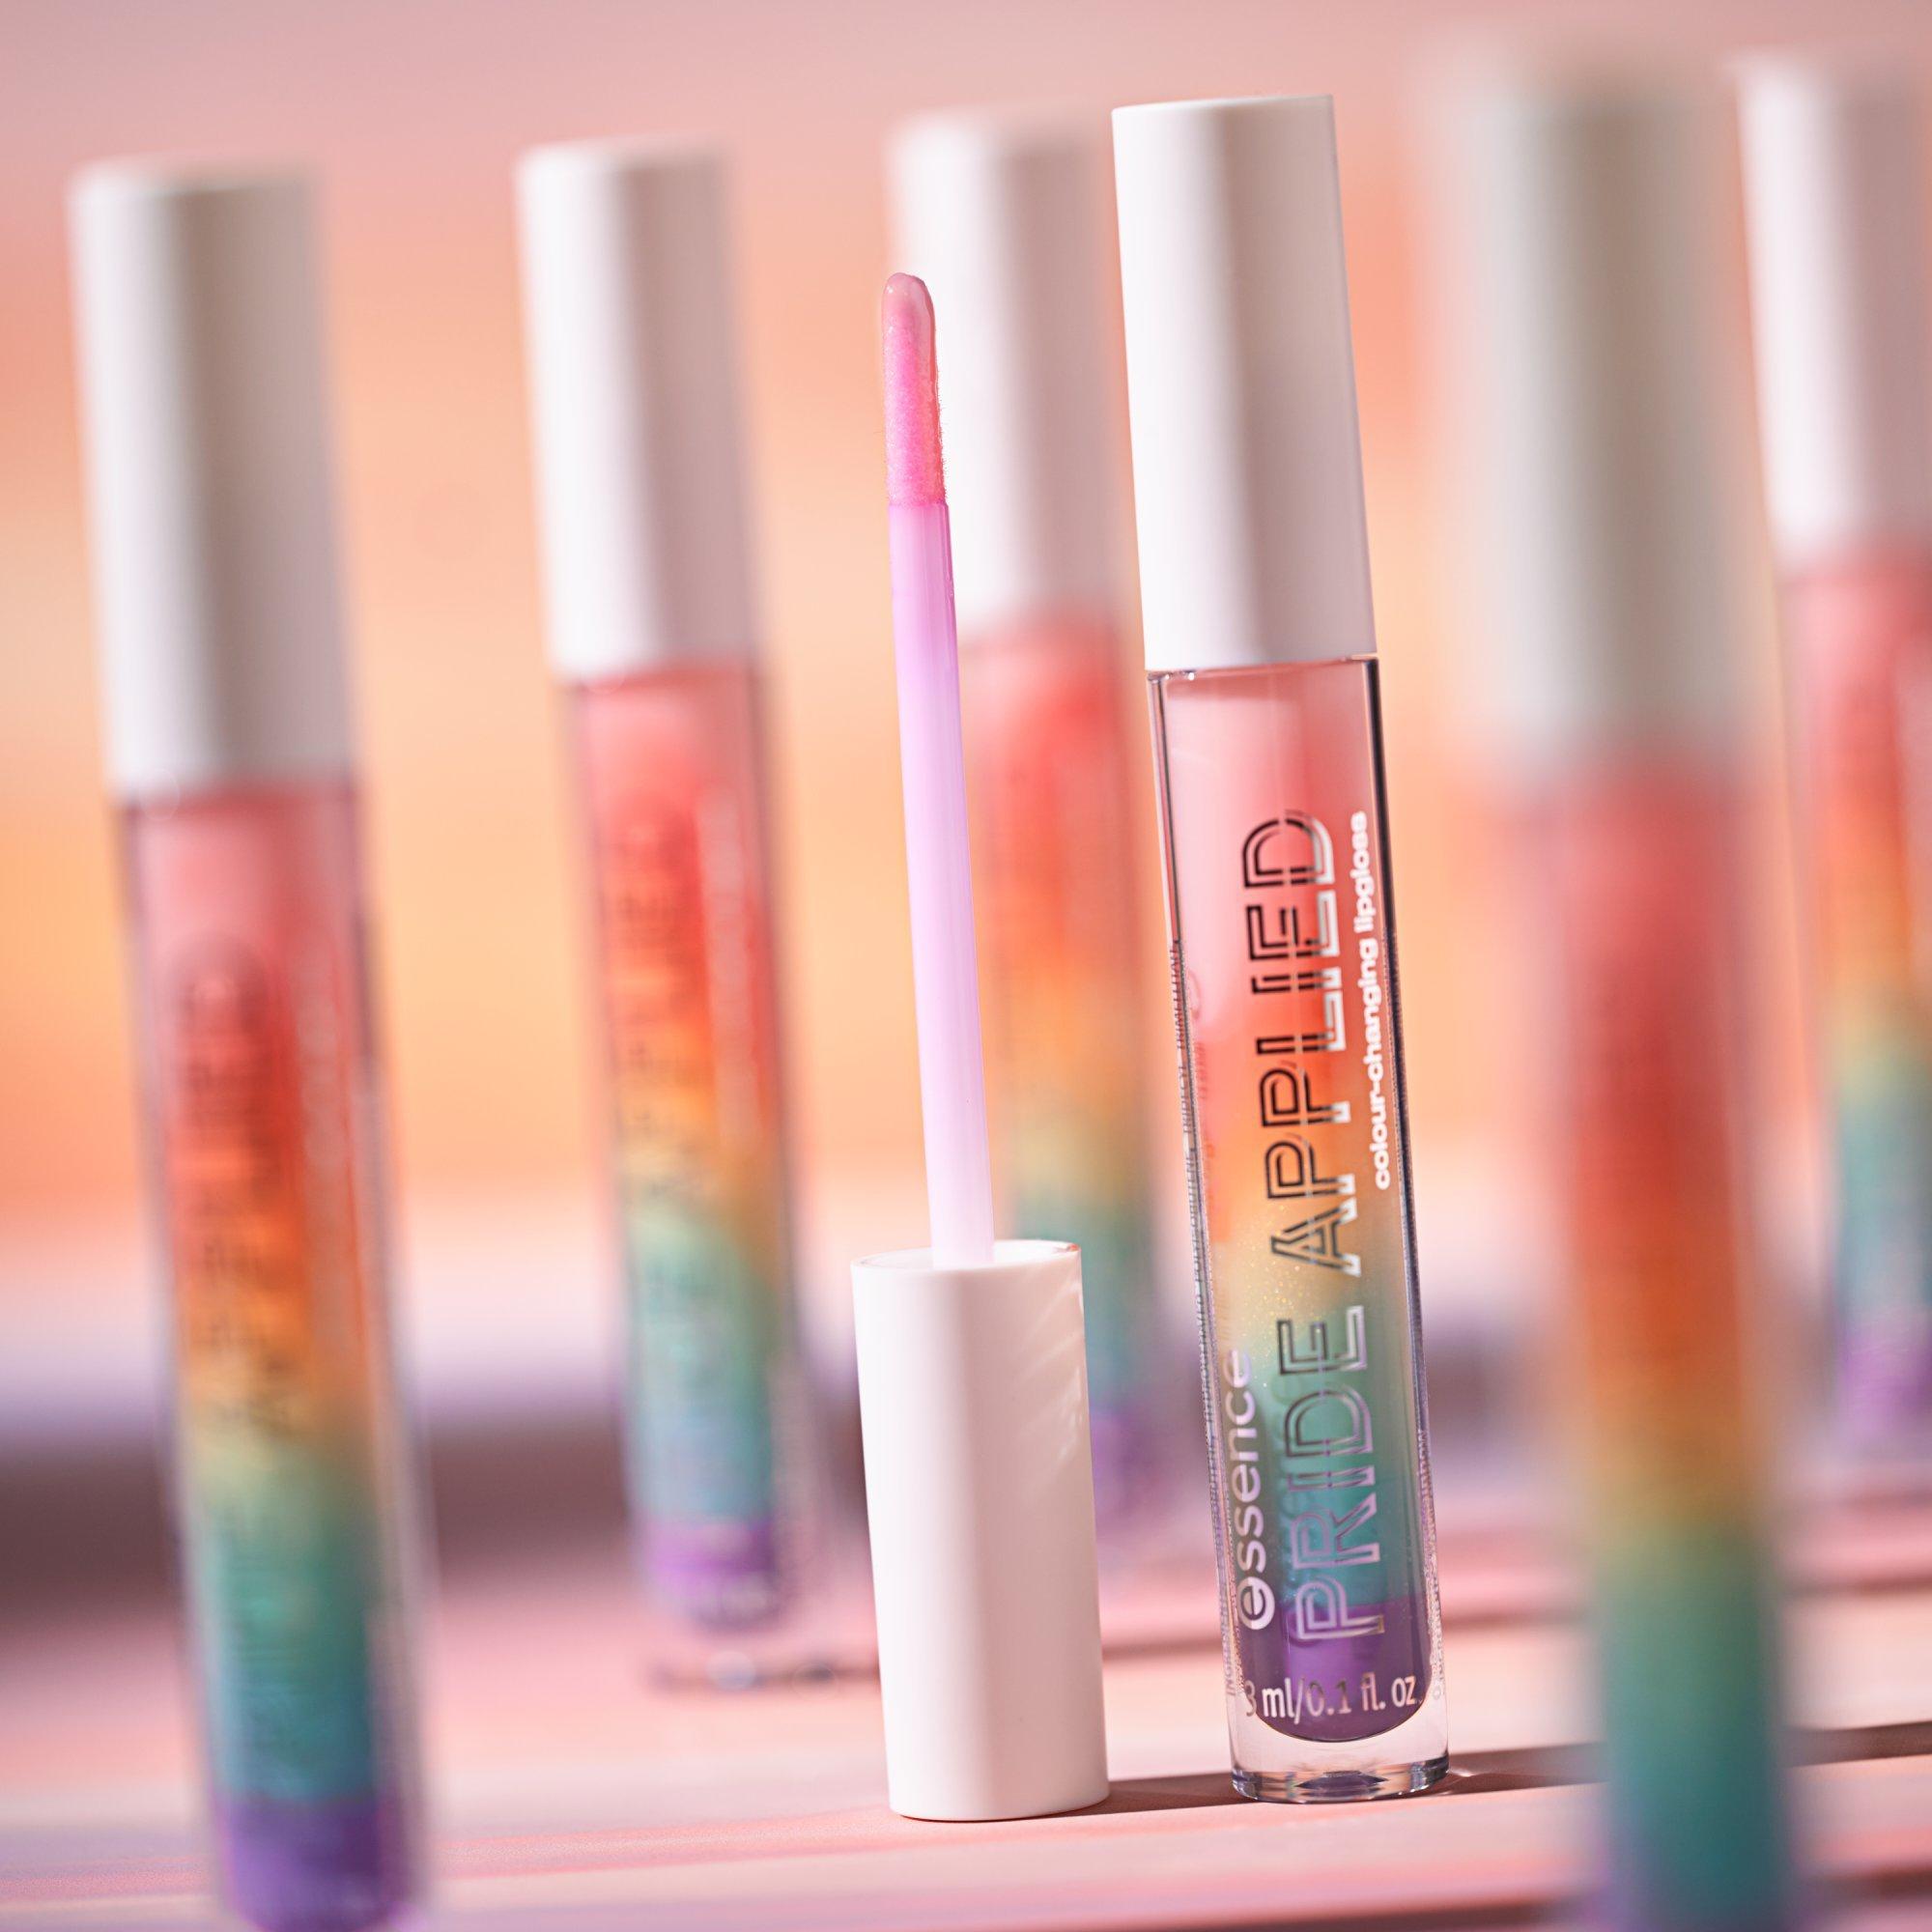 PRIDE APPLIED colour-changing lipgloss